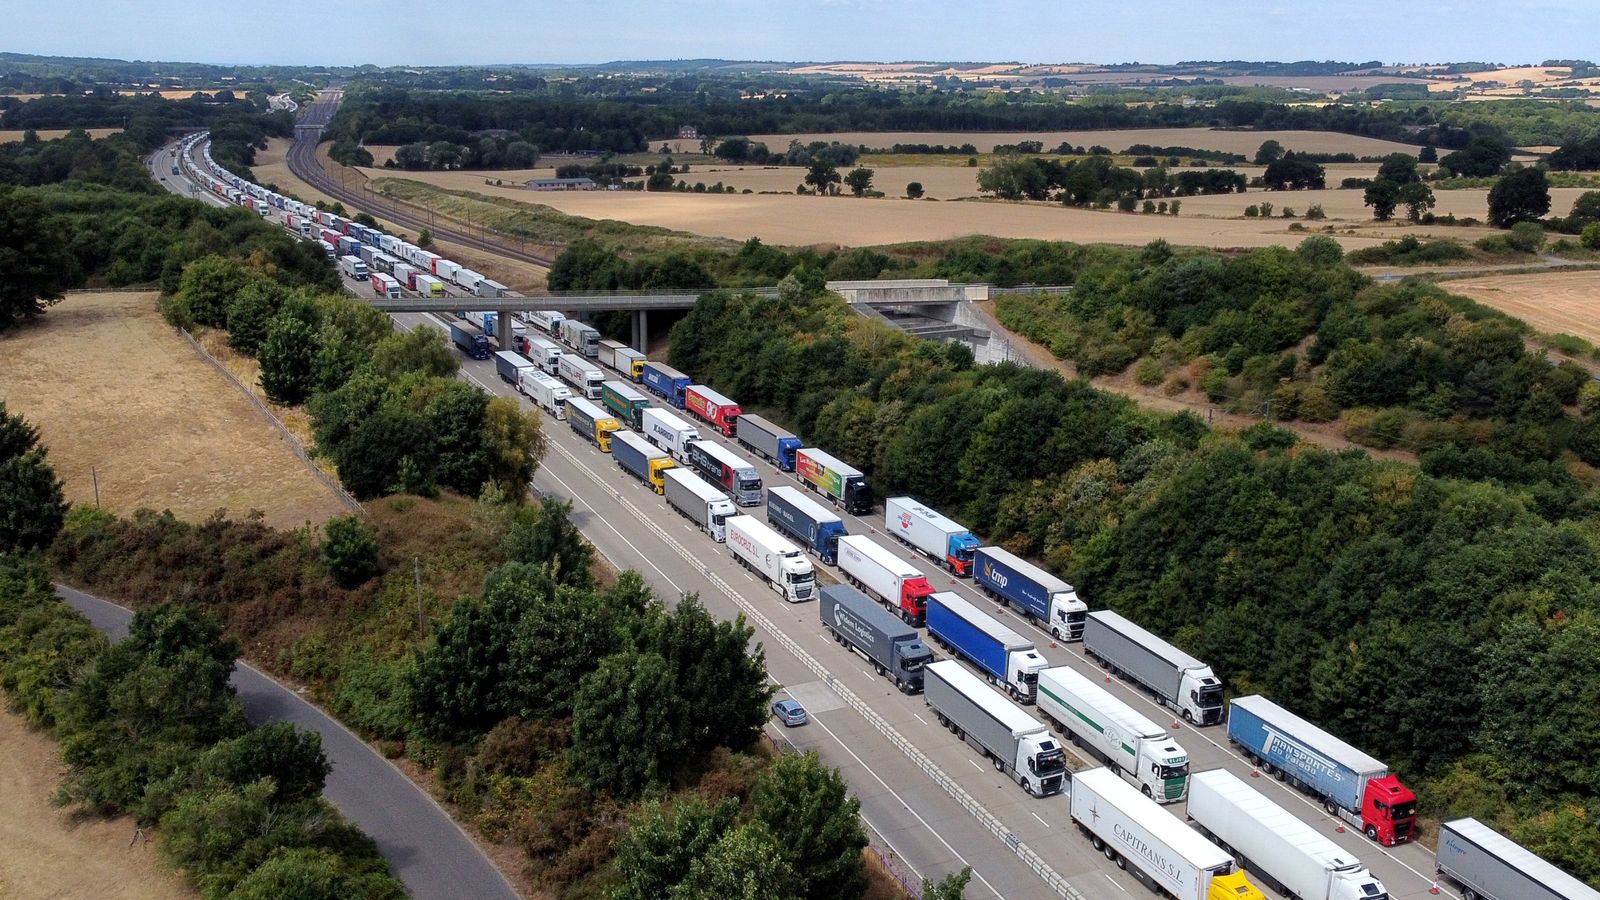 severe-traffic-delays-expected-again-as-port-of-dover-insists-services-are-flowing-normally